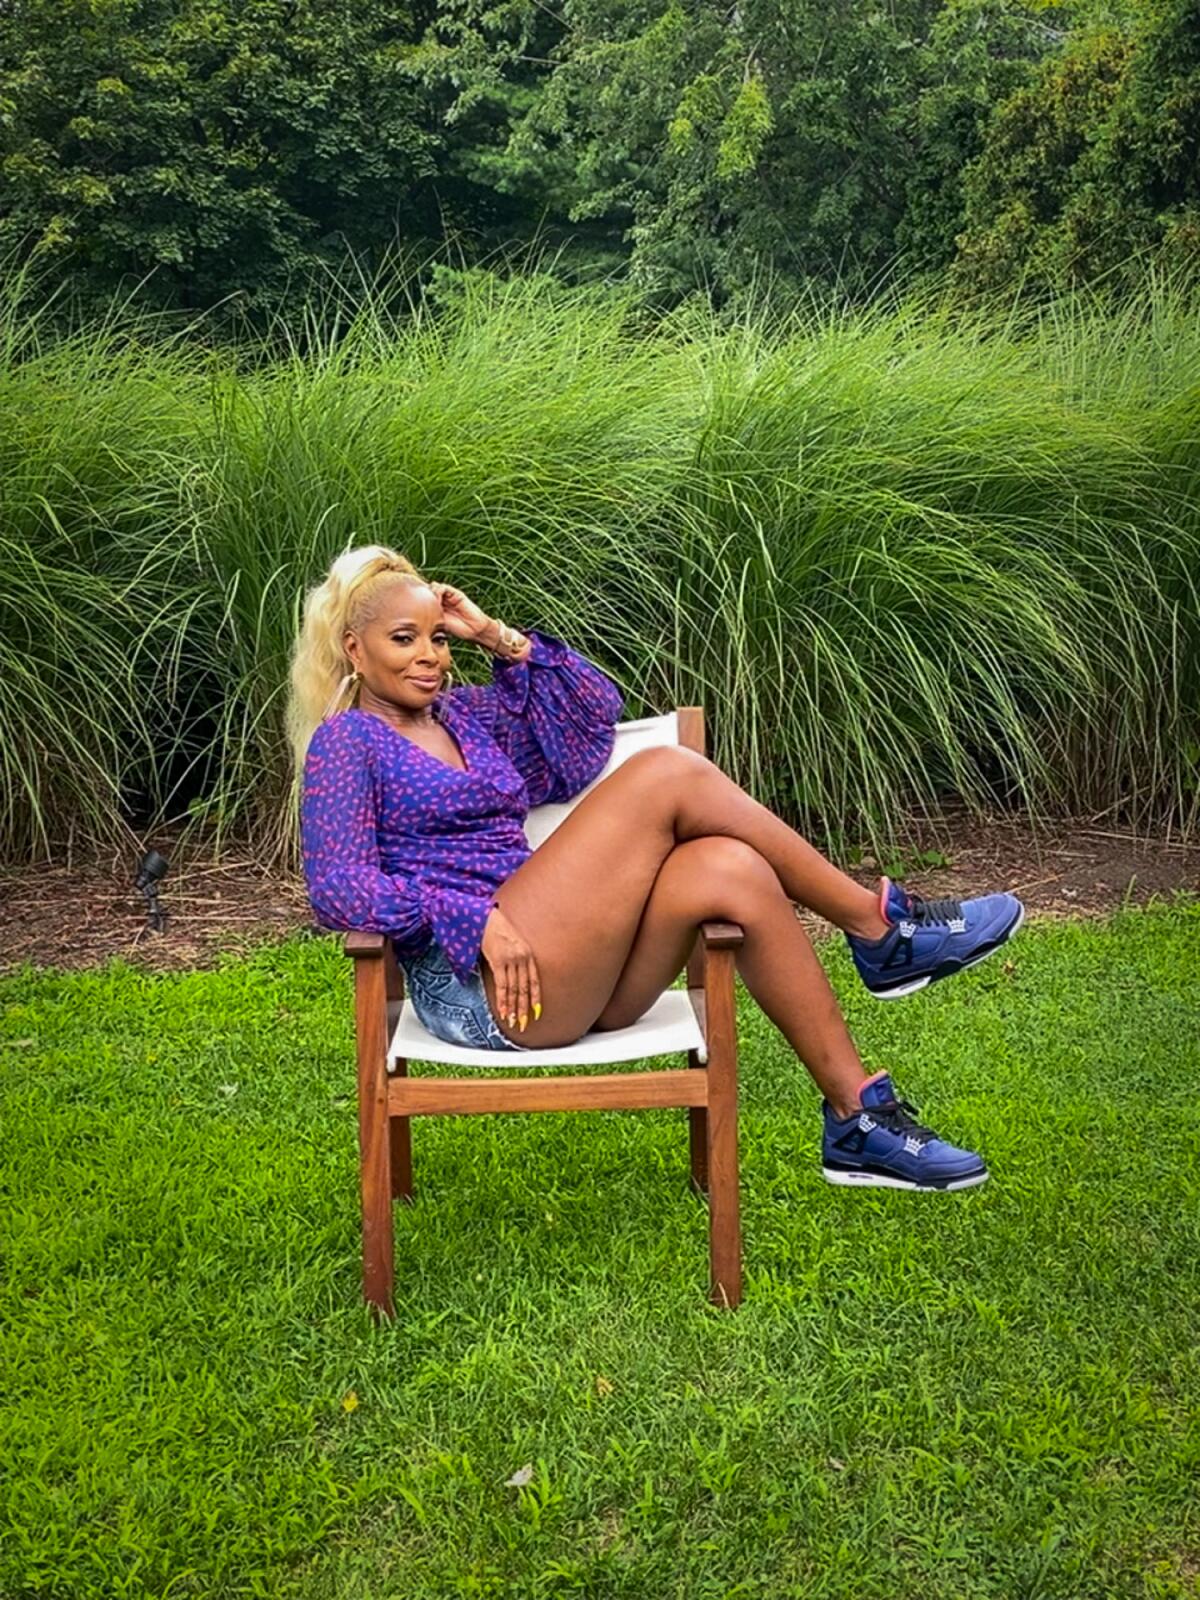 Actress and R&B recording artist Mary J. Blige in the backyard of her home. Blige stars in Starz’s “Power Book II: Ghost.”